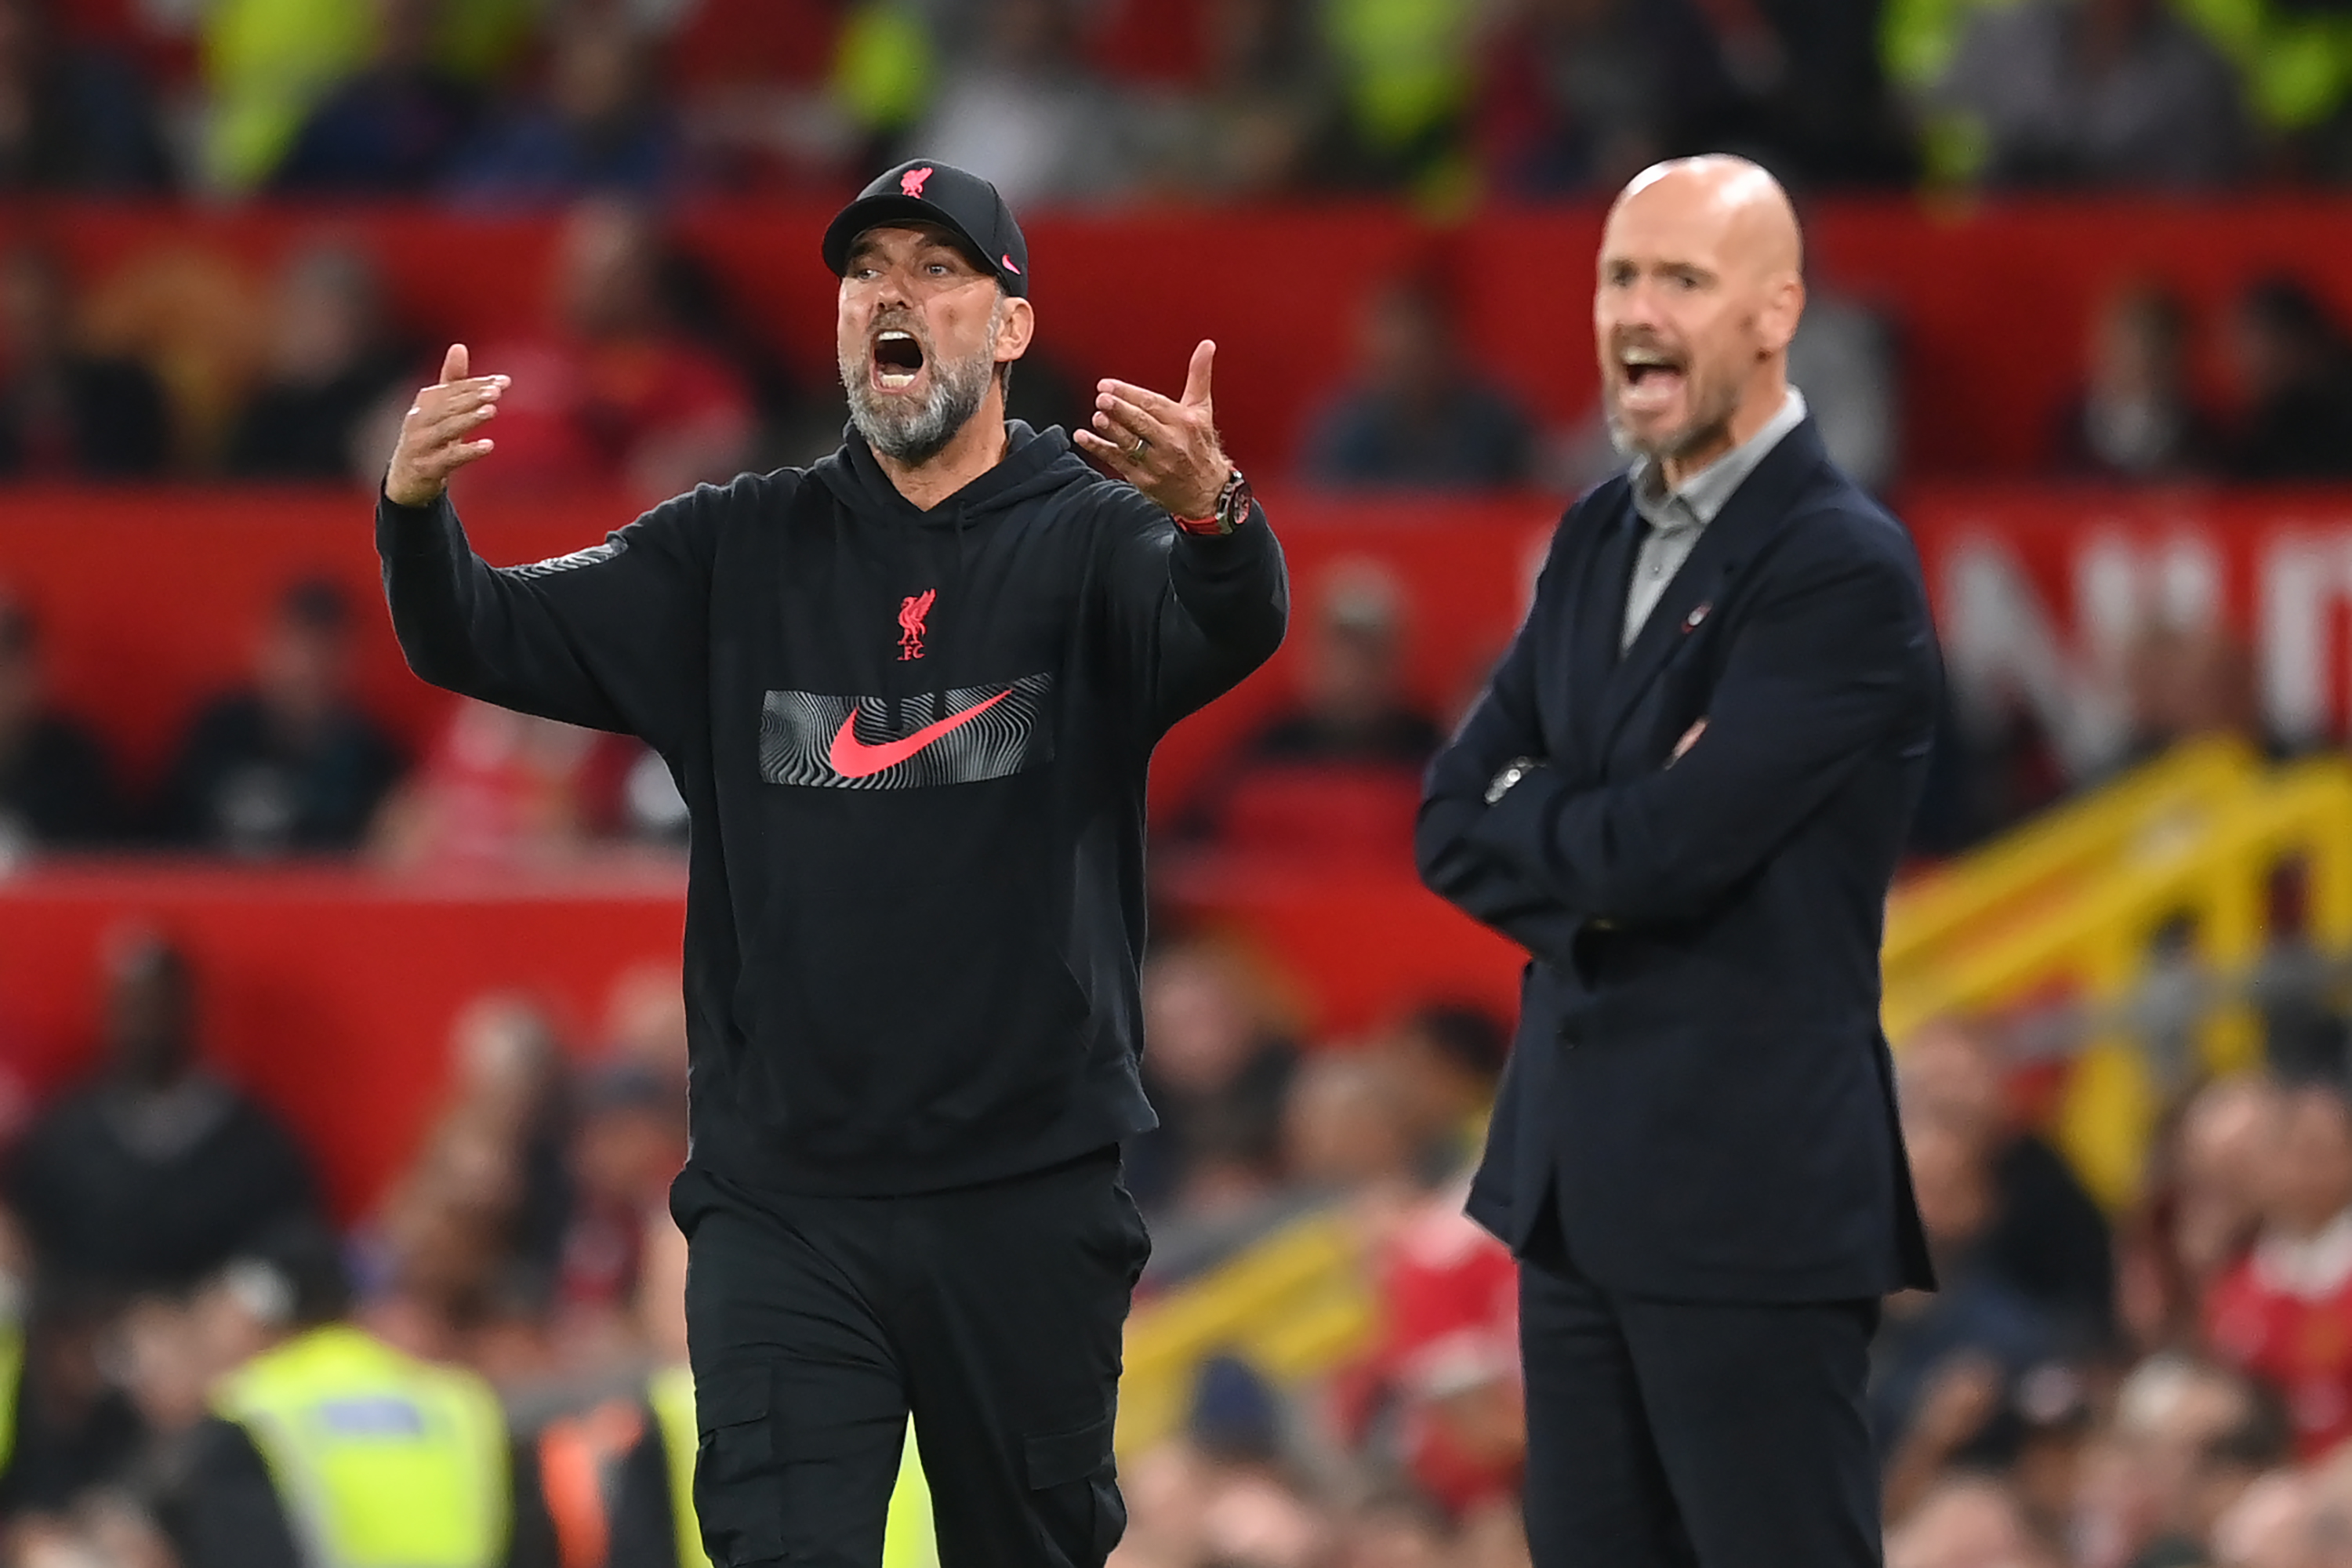 “It’s not about Liverpool” – Ten Hag sends Anfield message as United sweat over top four